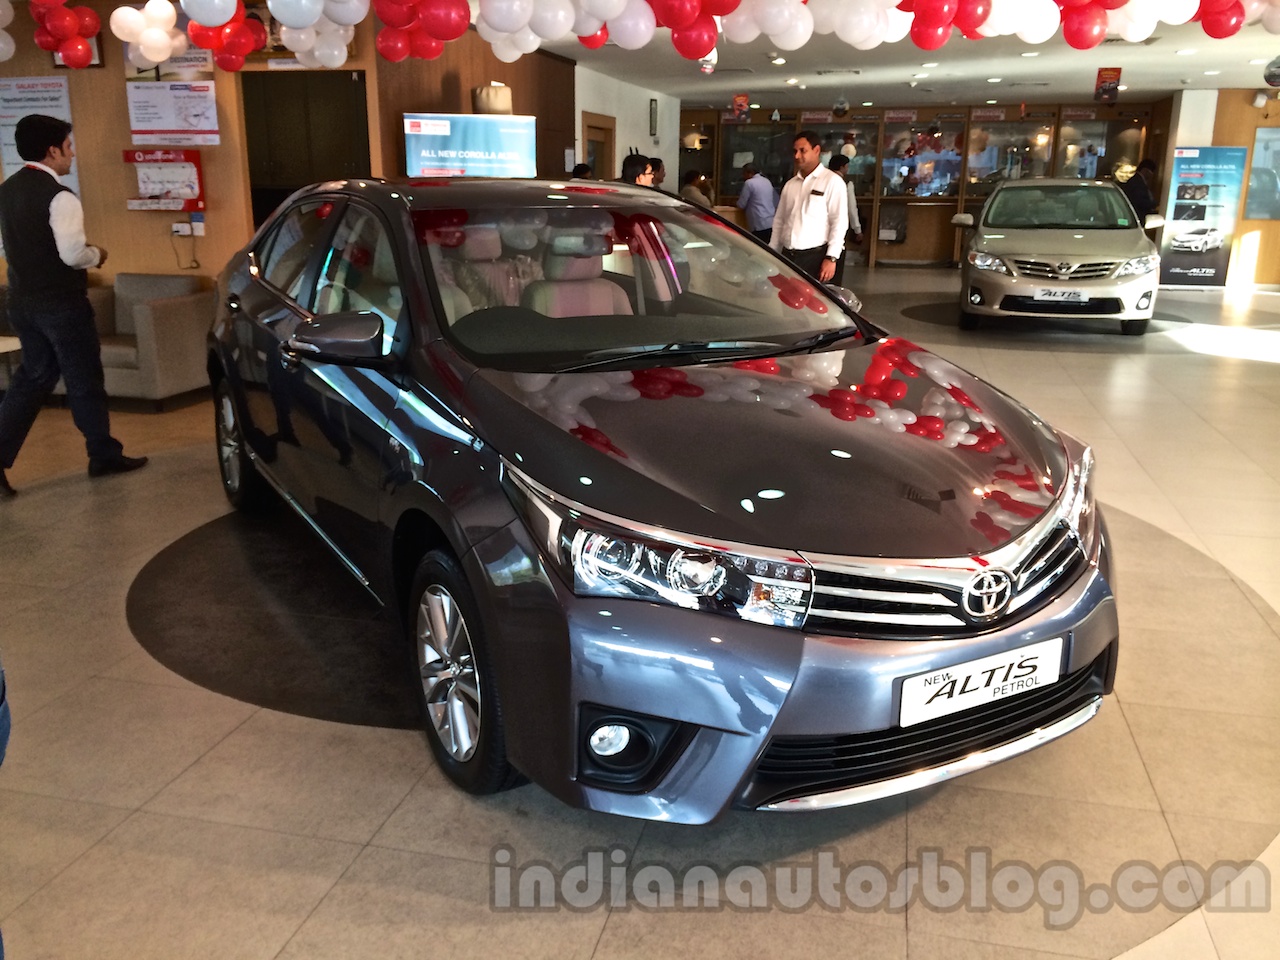 2014 Toyota Corolla spied Indian dealership